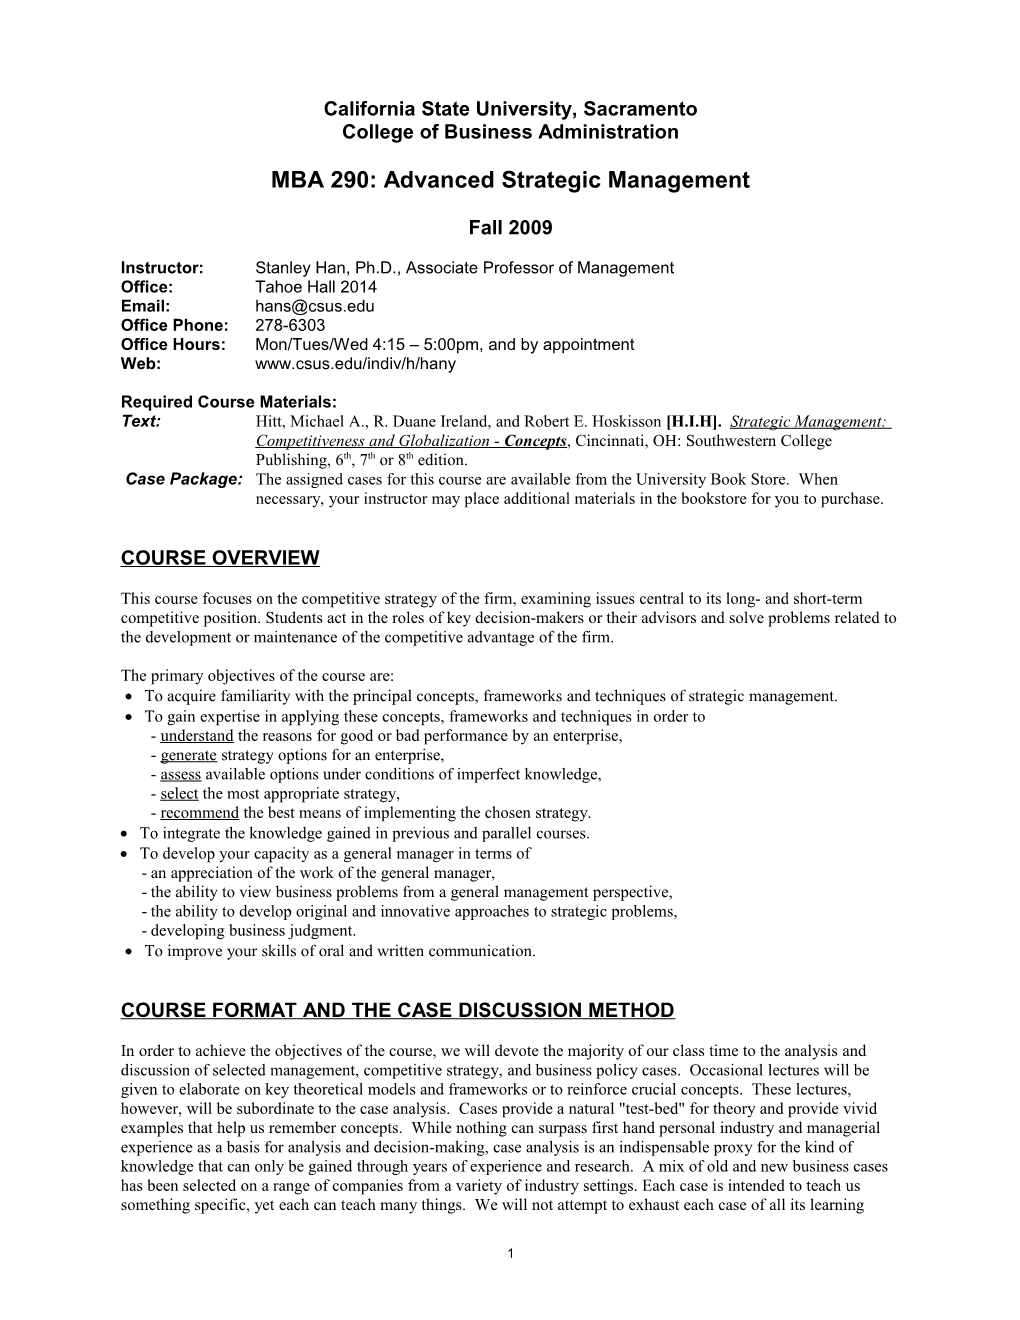 Buad 497: Managerial Decision-Making and Strategic Planning